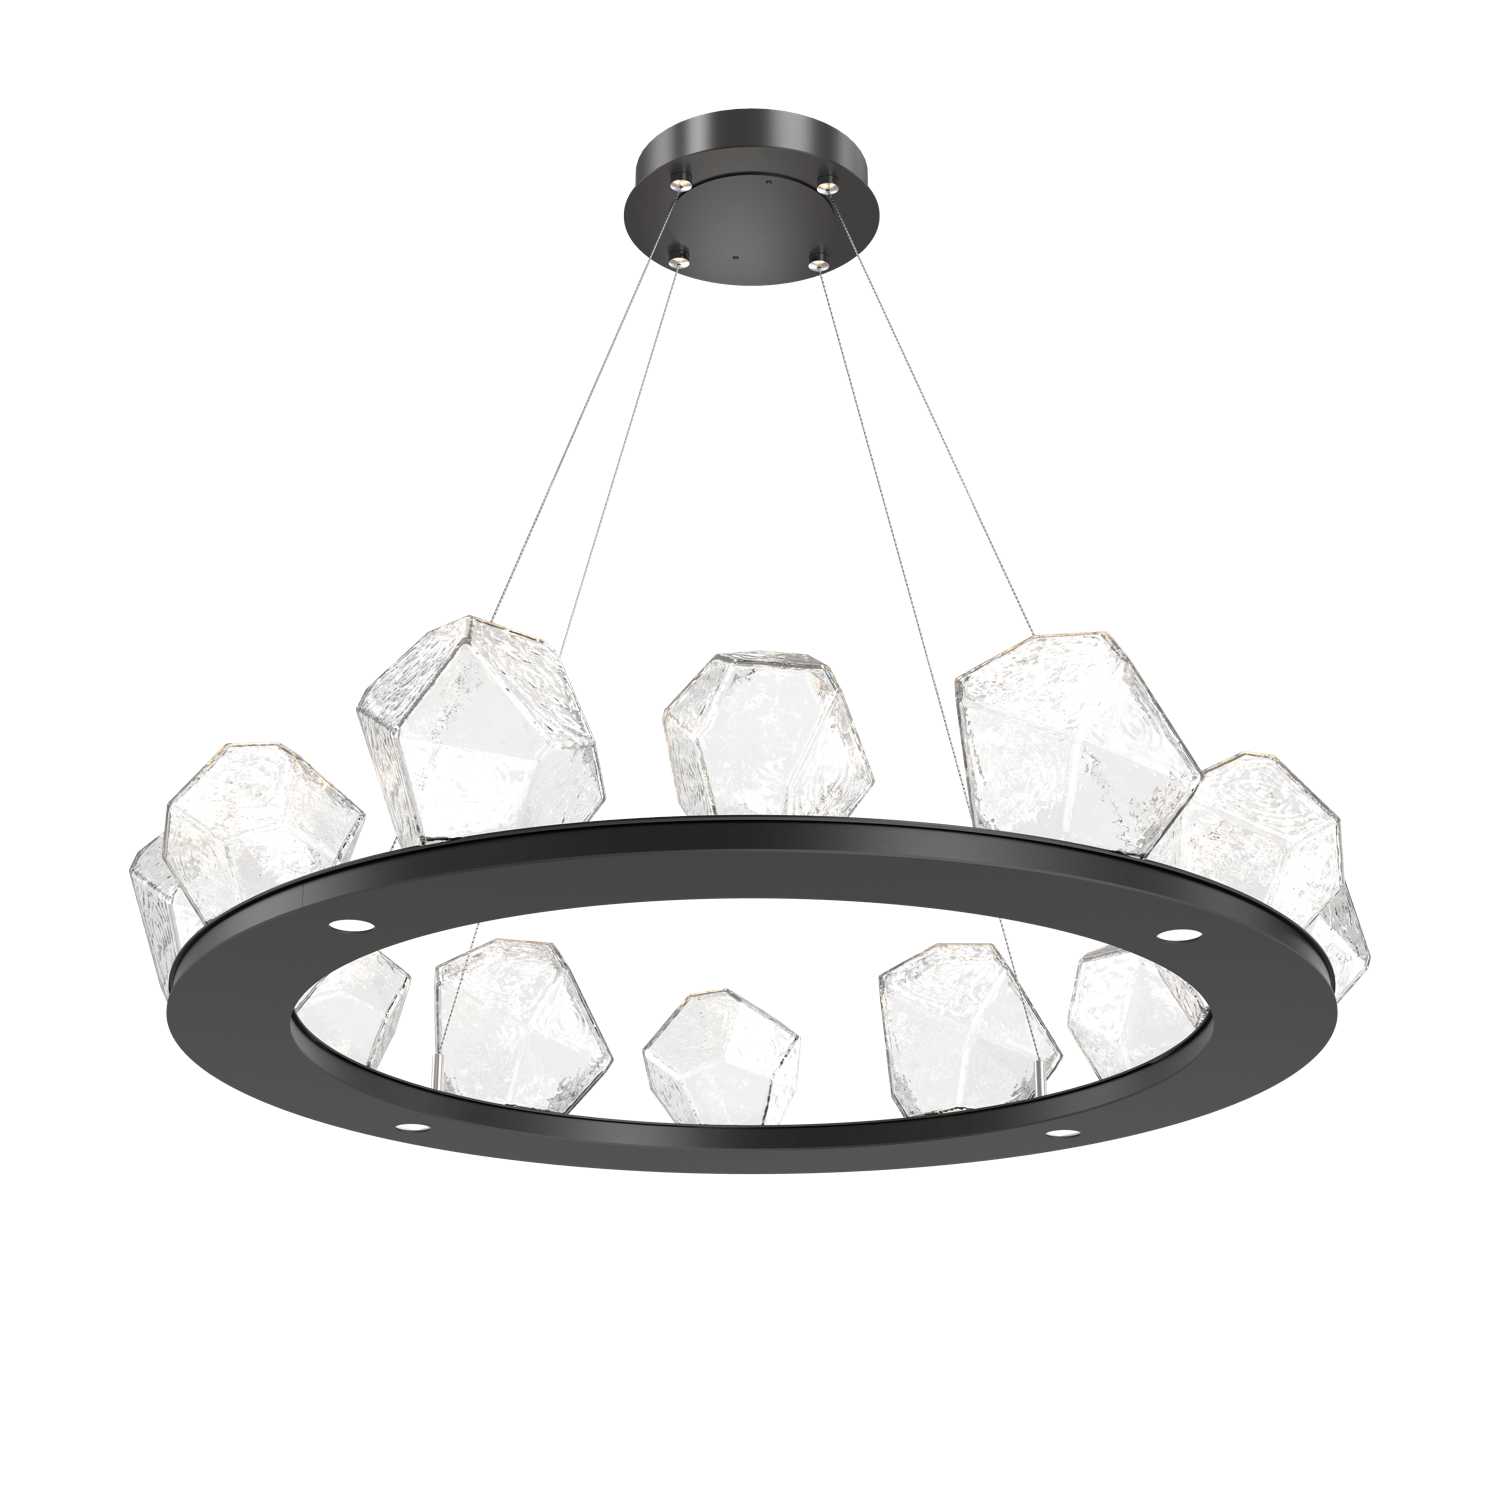 CHB0039-0C-MB-C-Hammerton-Studio-Gem-37-inch-ring-chandelier-with-matte-black-finish-and-clear-blown-glass-shades-and-LED-lamping